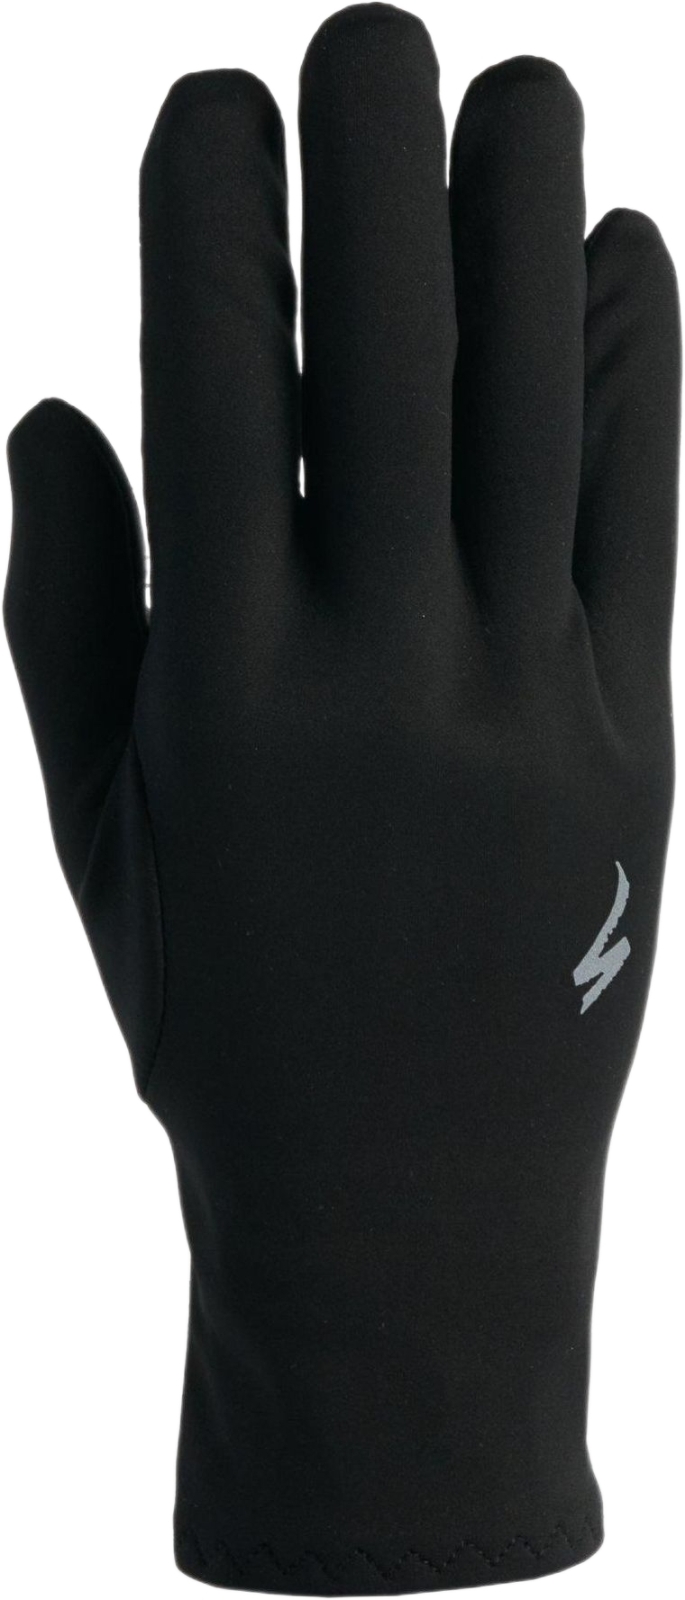 E-shop Specialized Men's Softshell Thermal Glove - black XL